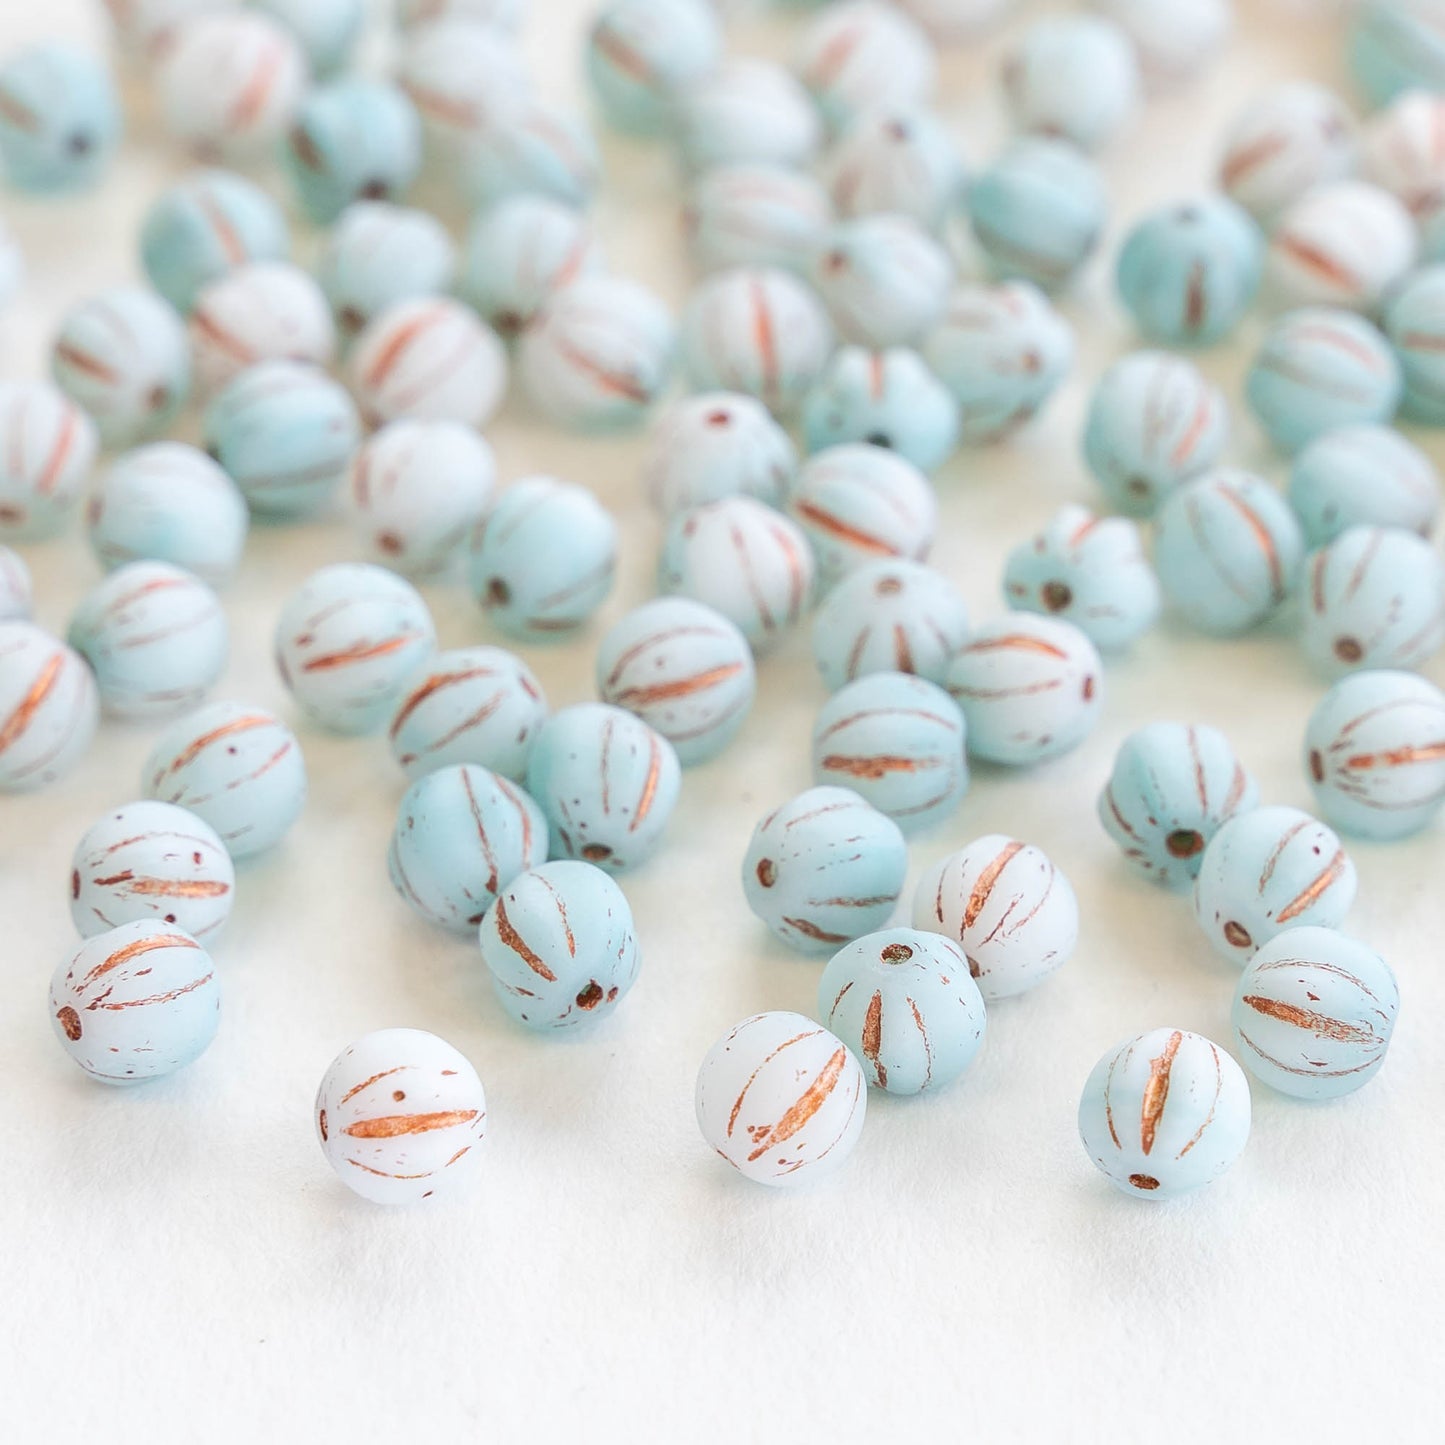 6mm Glass Beads - Matte Aqua & White with Copper Wash -  50 or 100